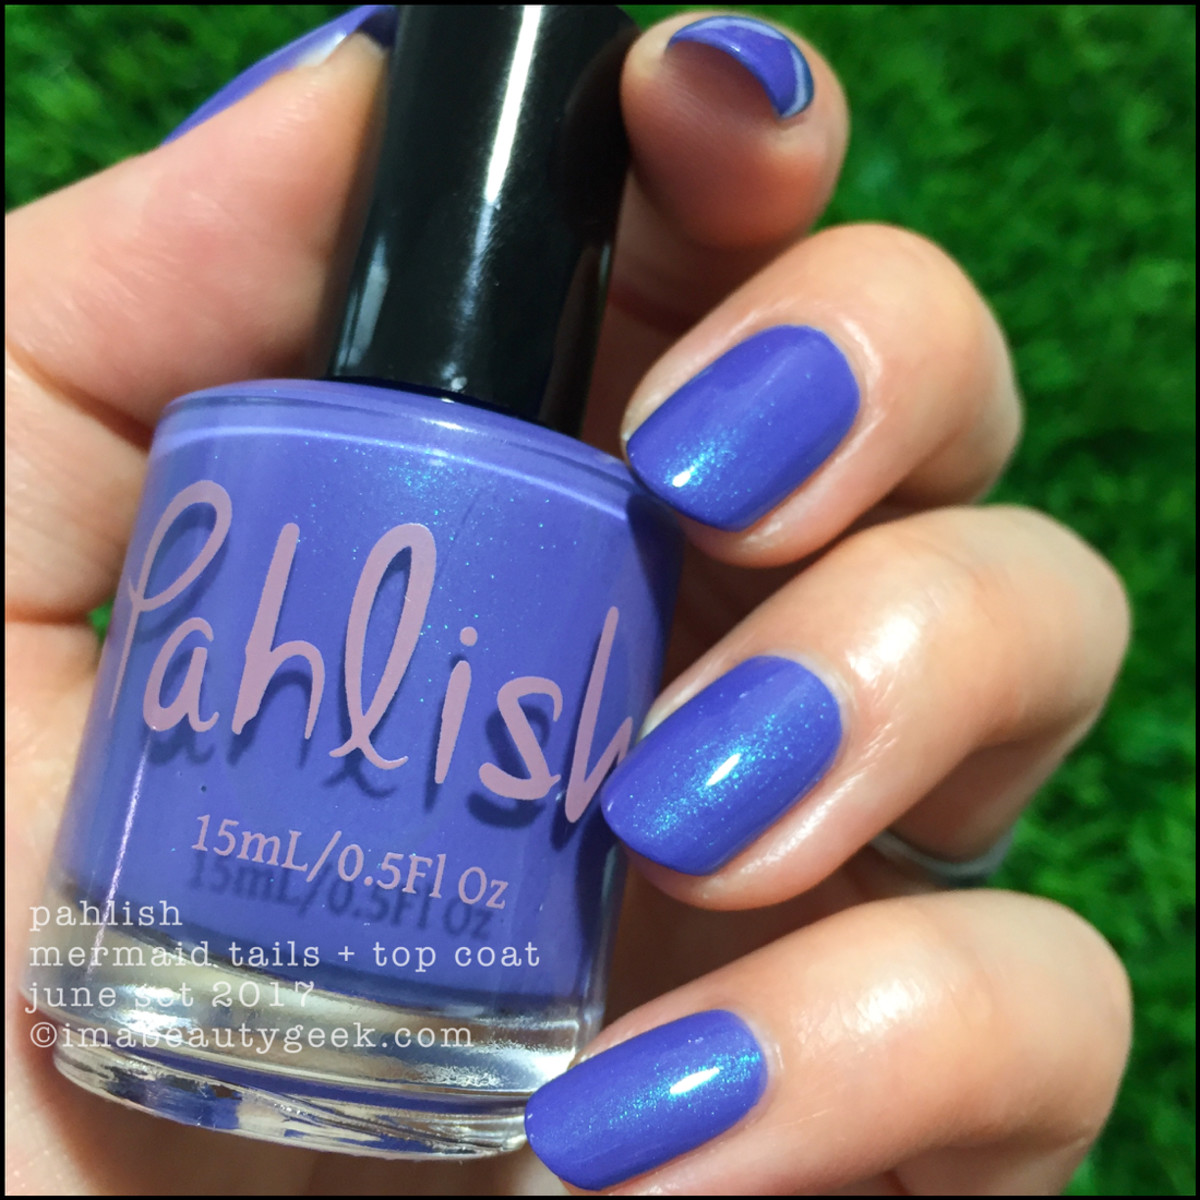 Pahlish Mermaid Tails Swatches - Pahlish June 2017 Collection Swatches